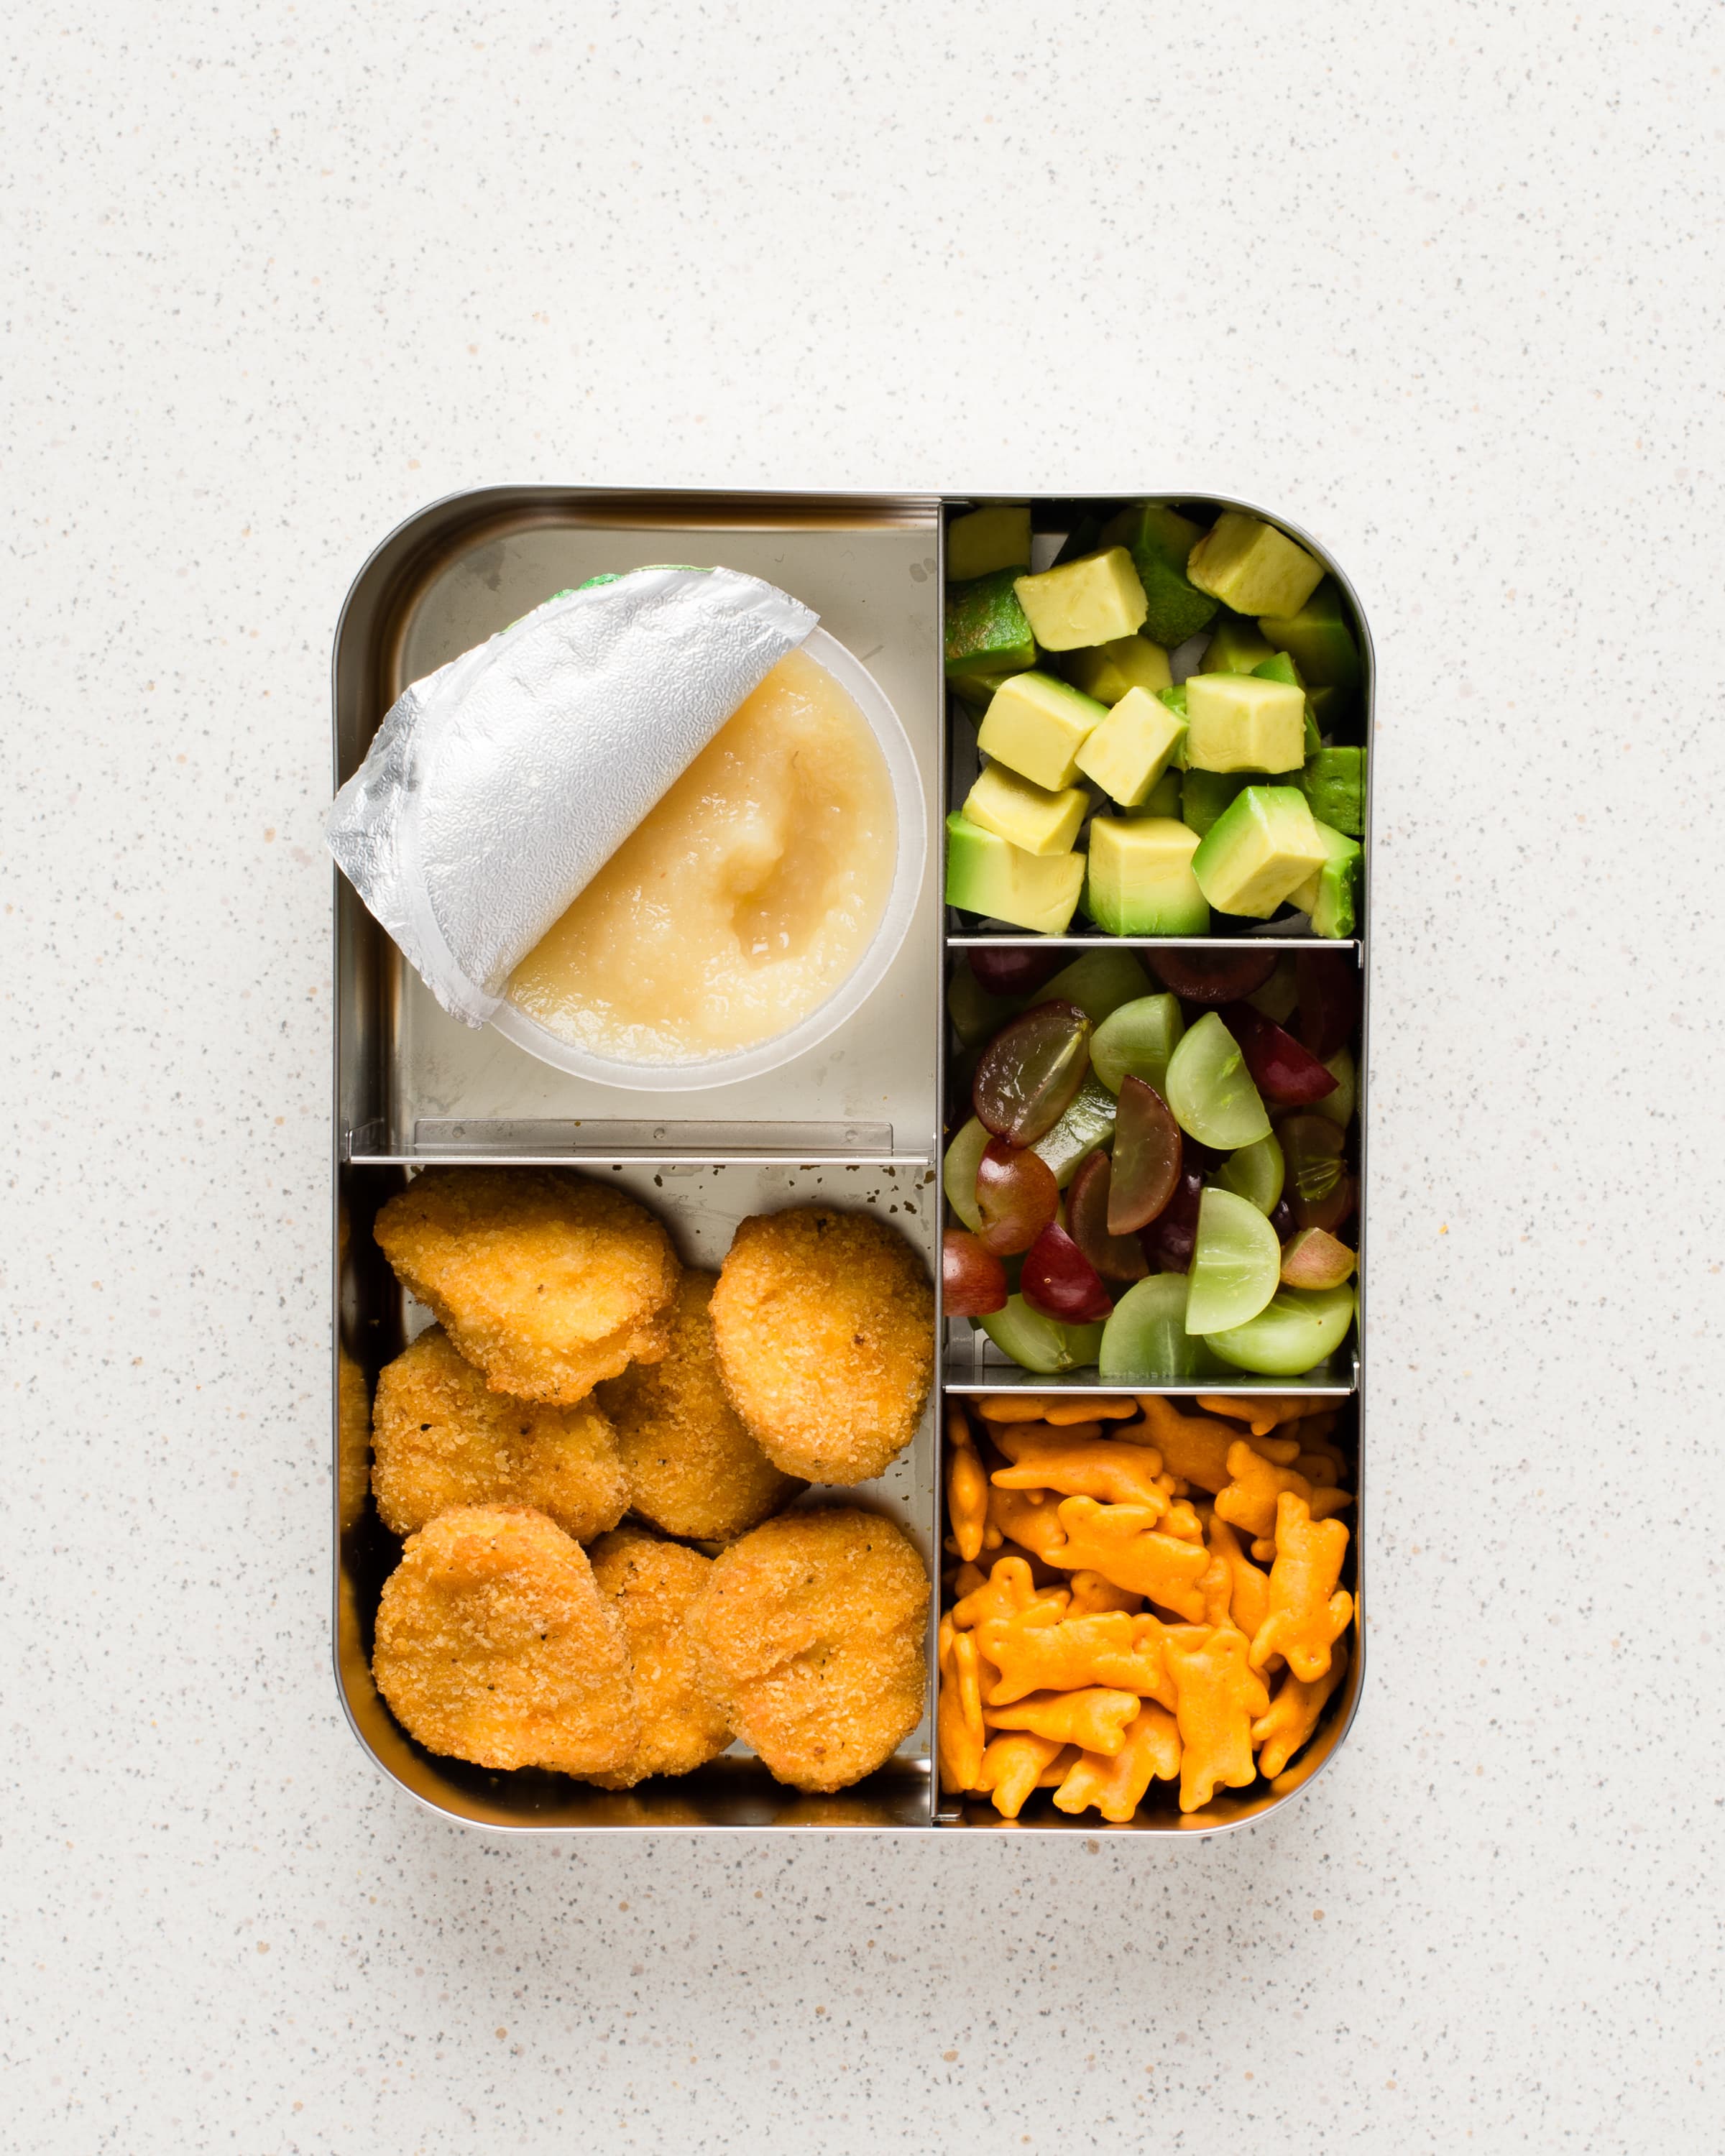 30 Easy And Healthy Toddler Lunch Ideas For Daycare